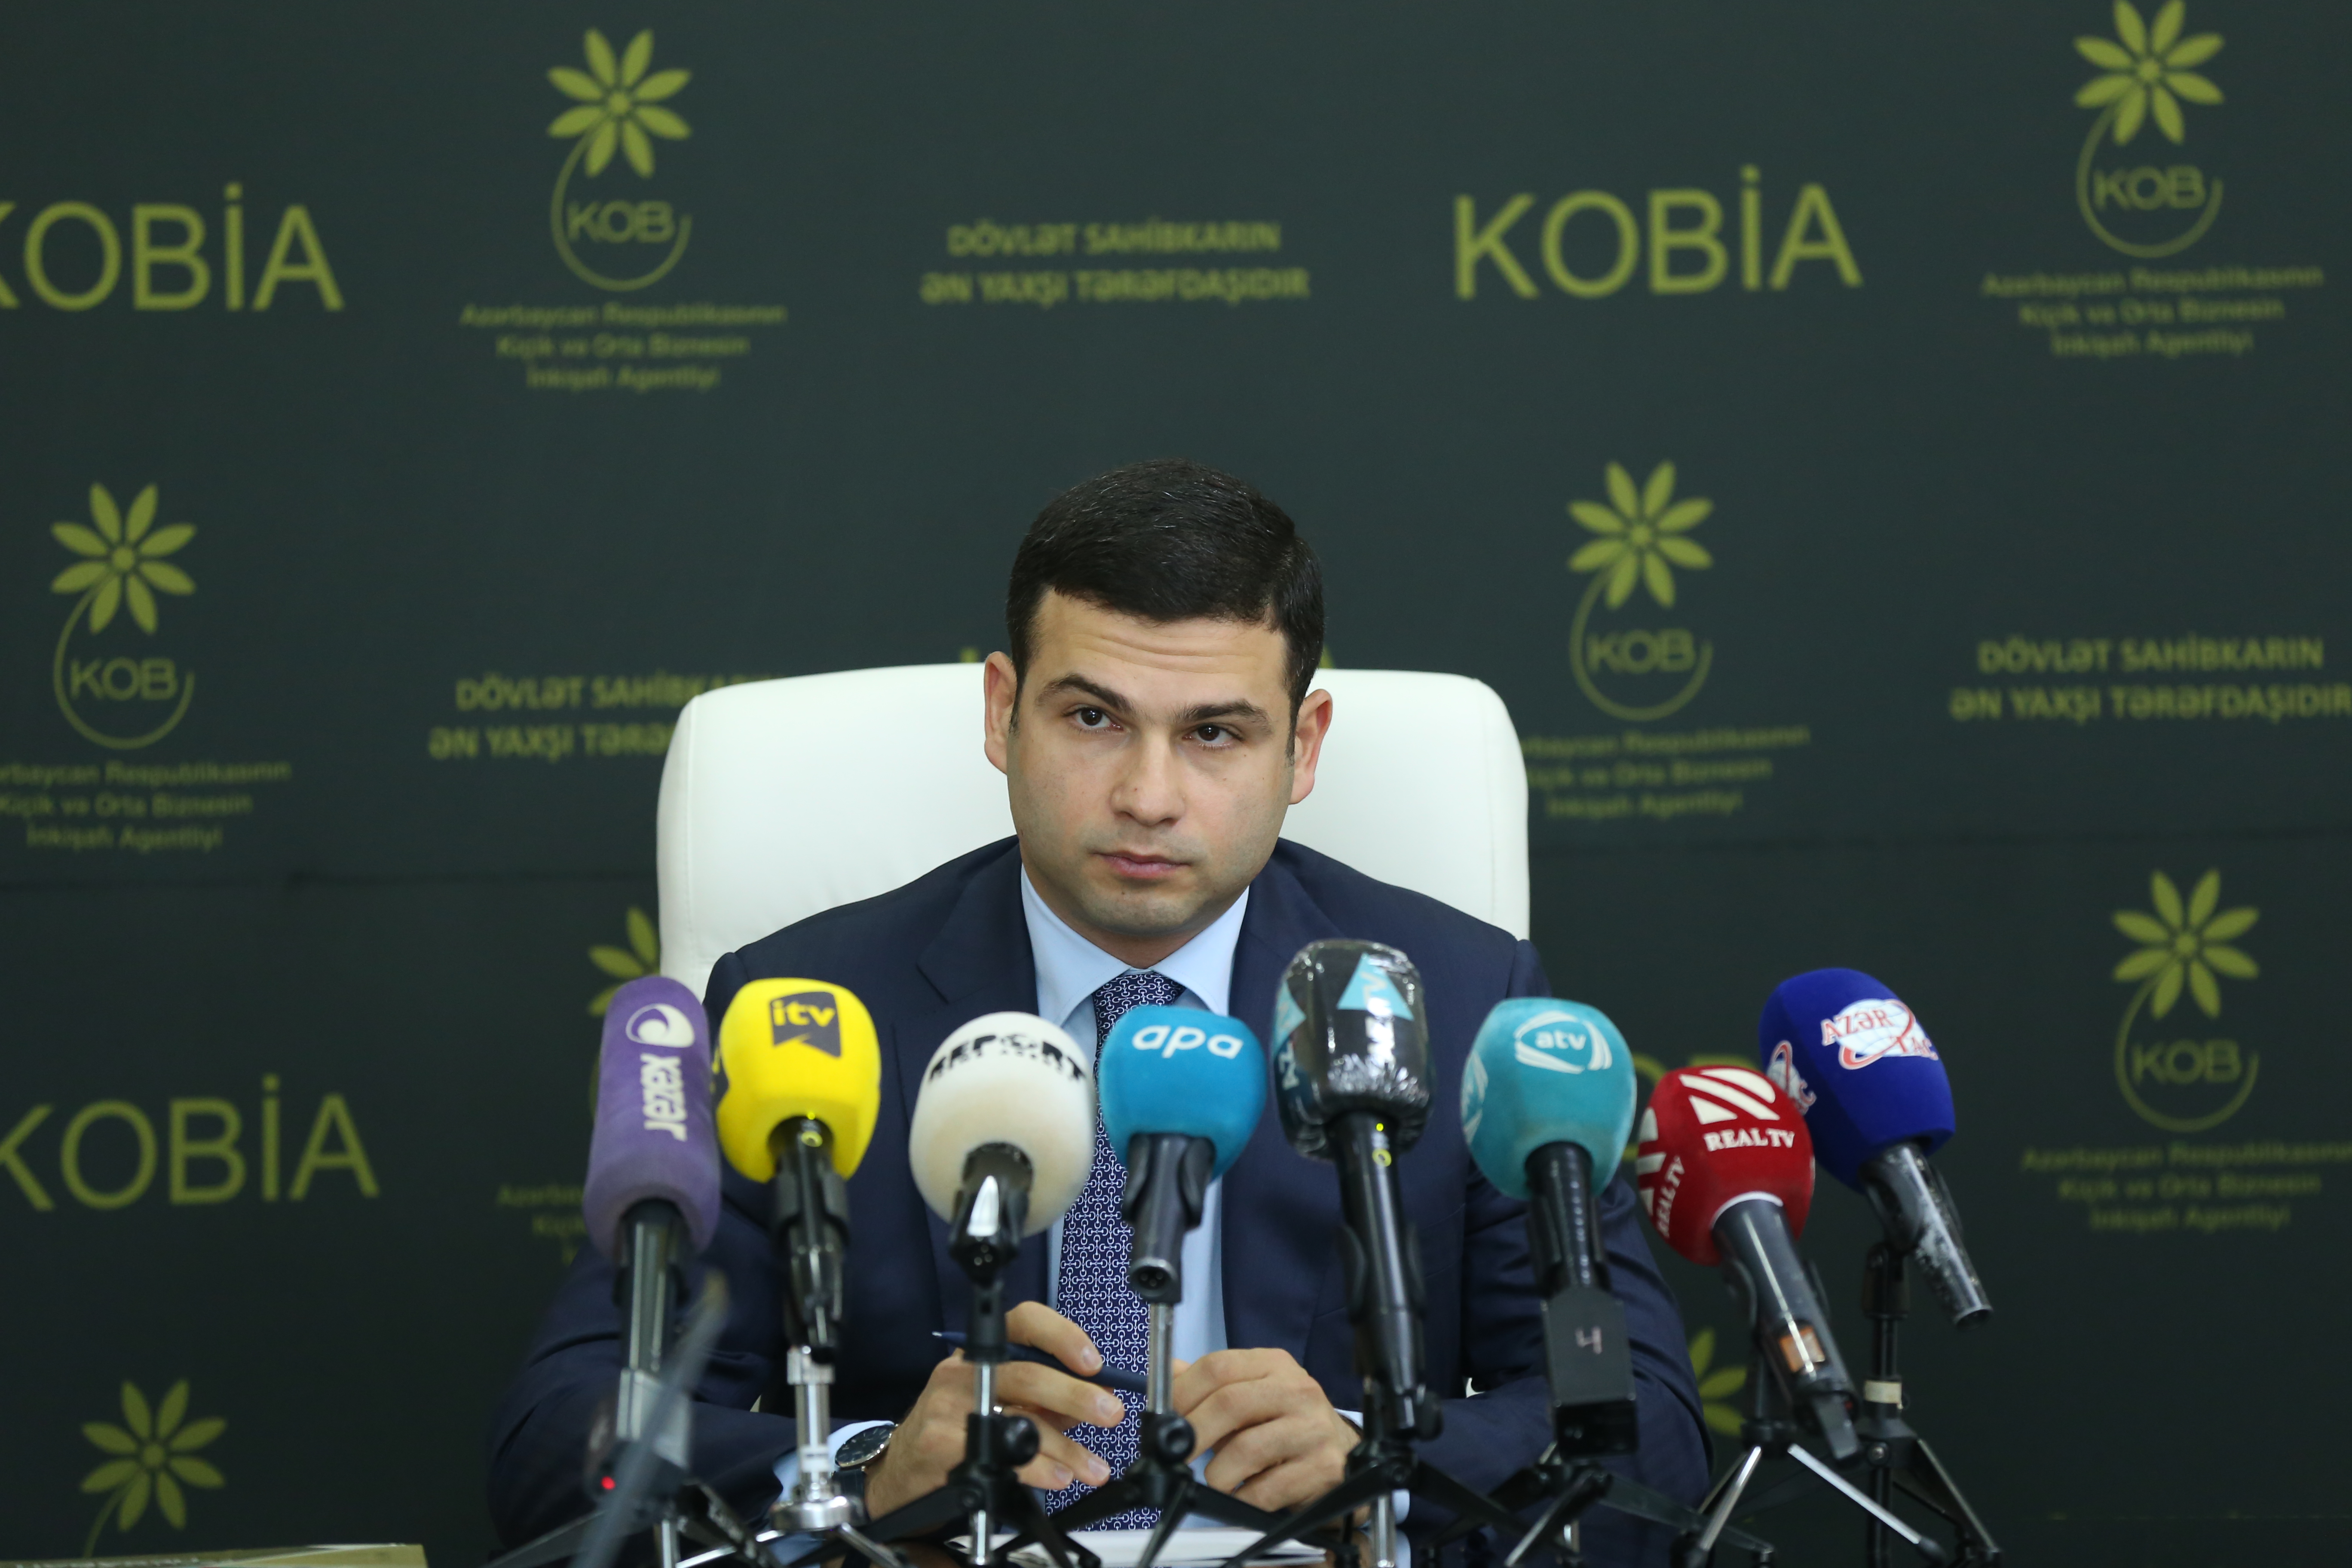 KOBIA held a briefing on the results of 2020 